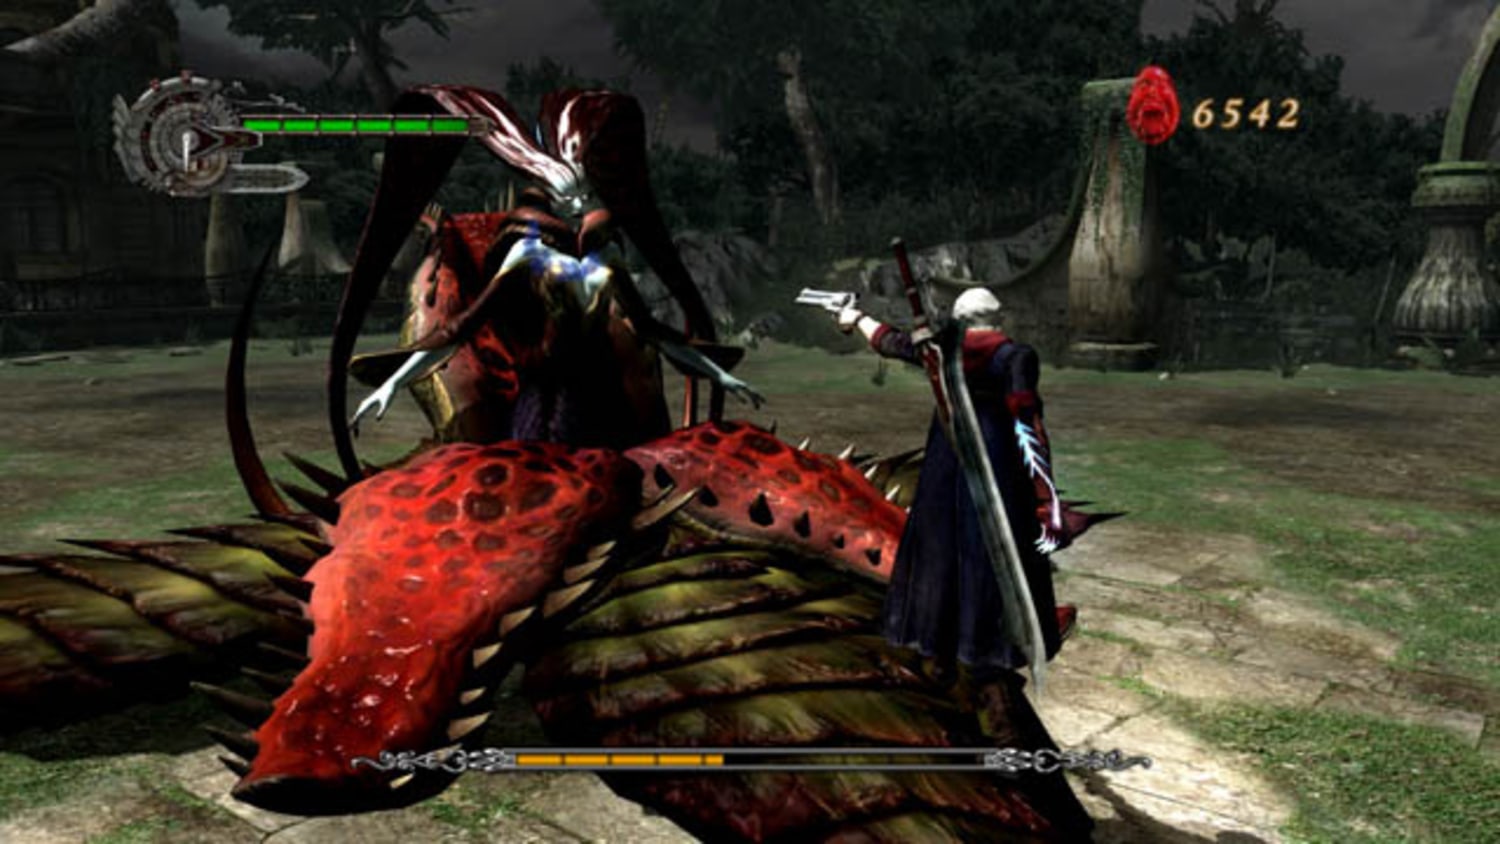 Nero's moves are on display in this Devil May Cry 4: Special